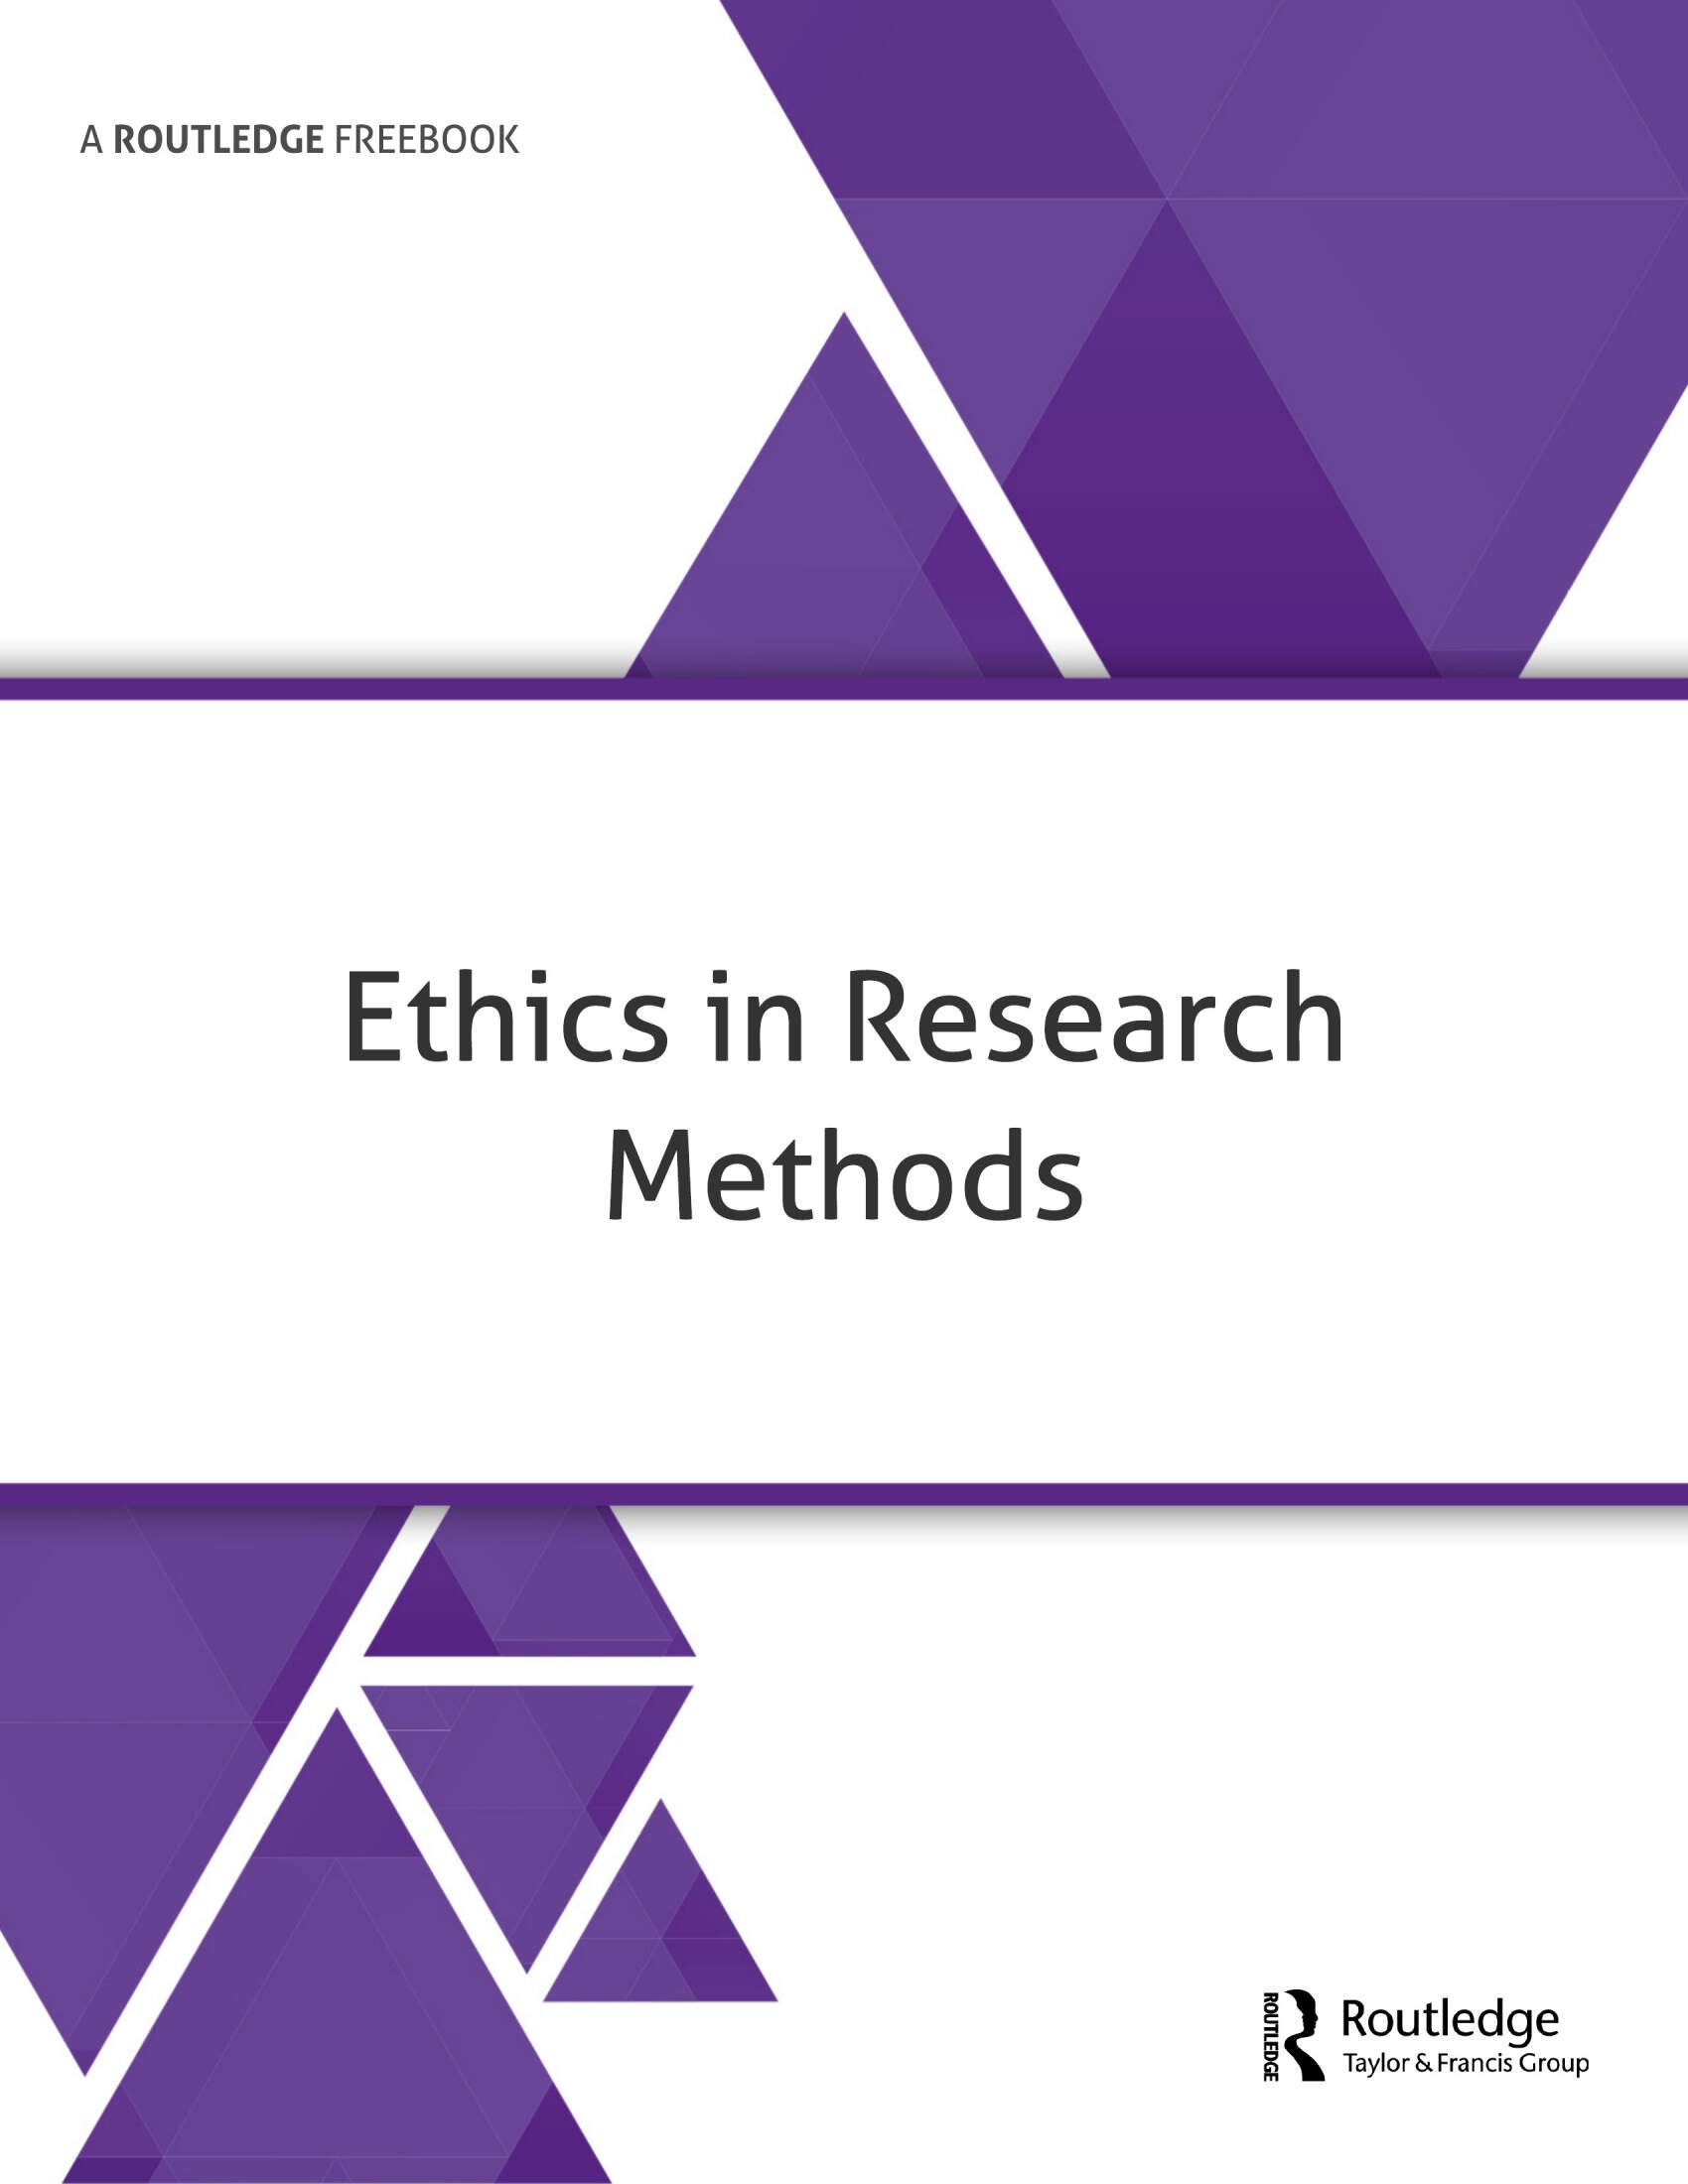 ethics in research methods cover